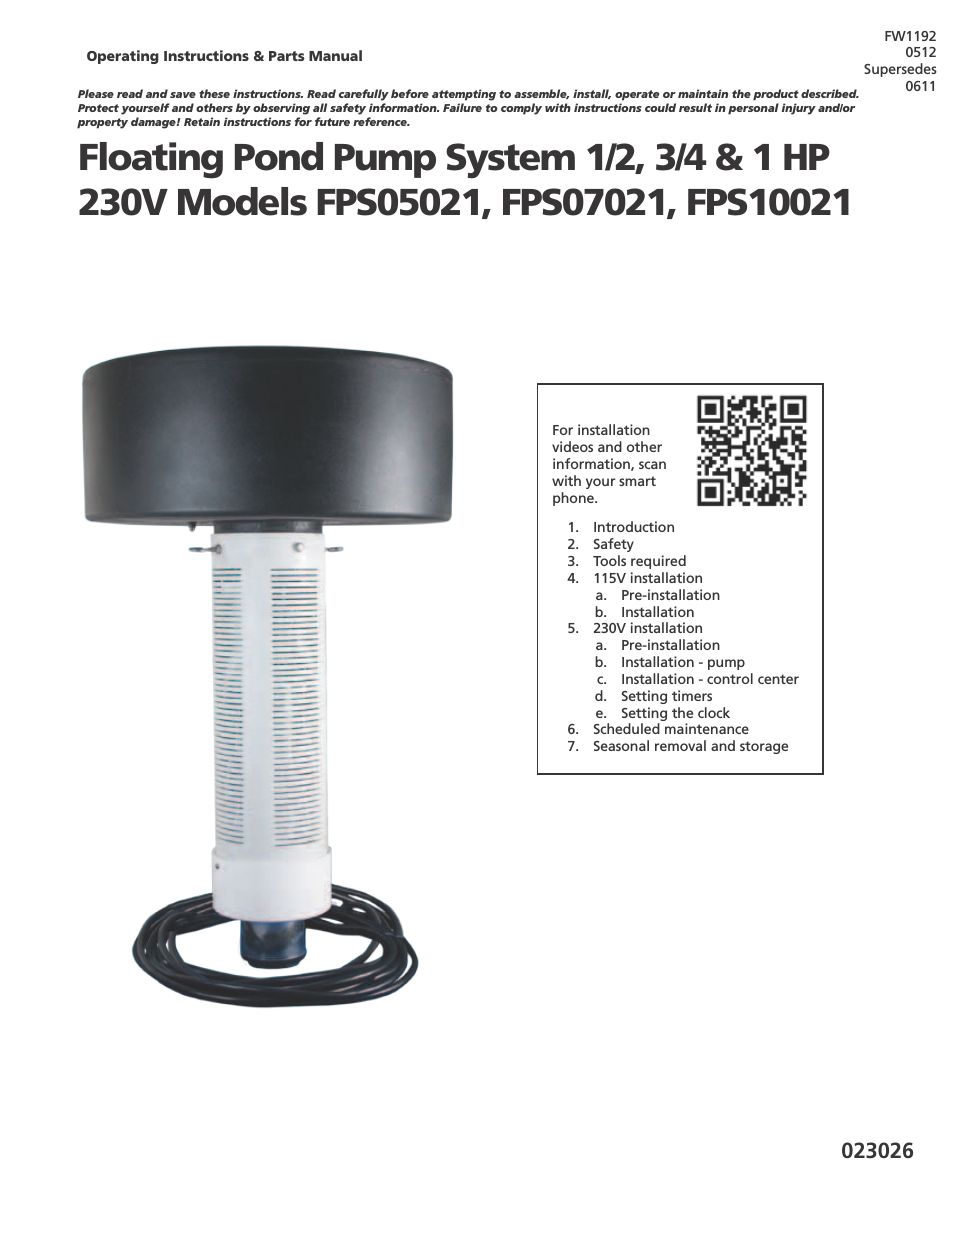 230V Pond and Fountain Systems FPS07021